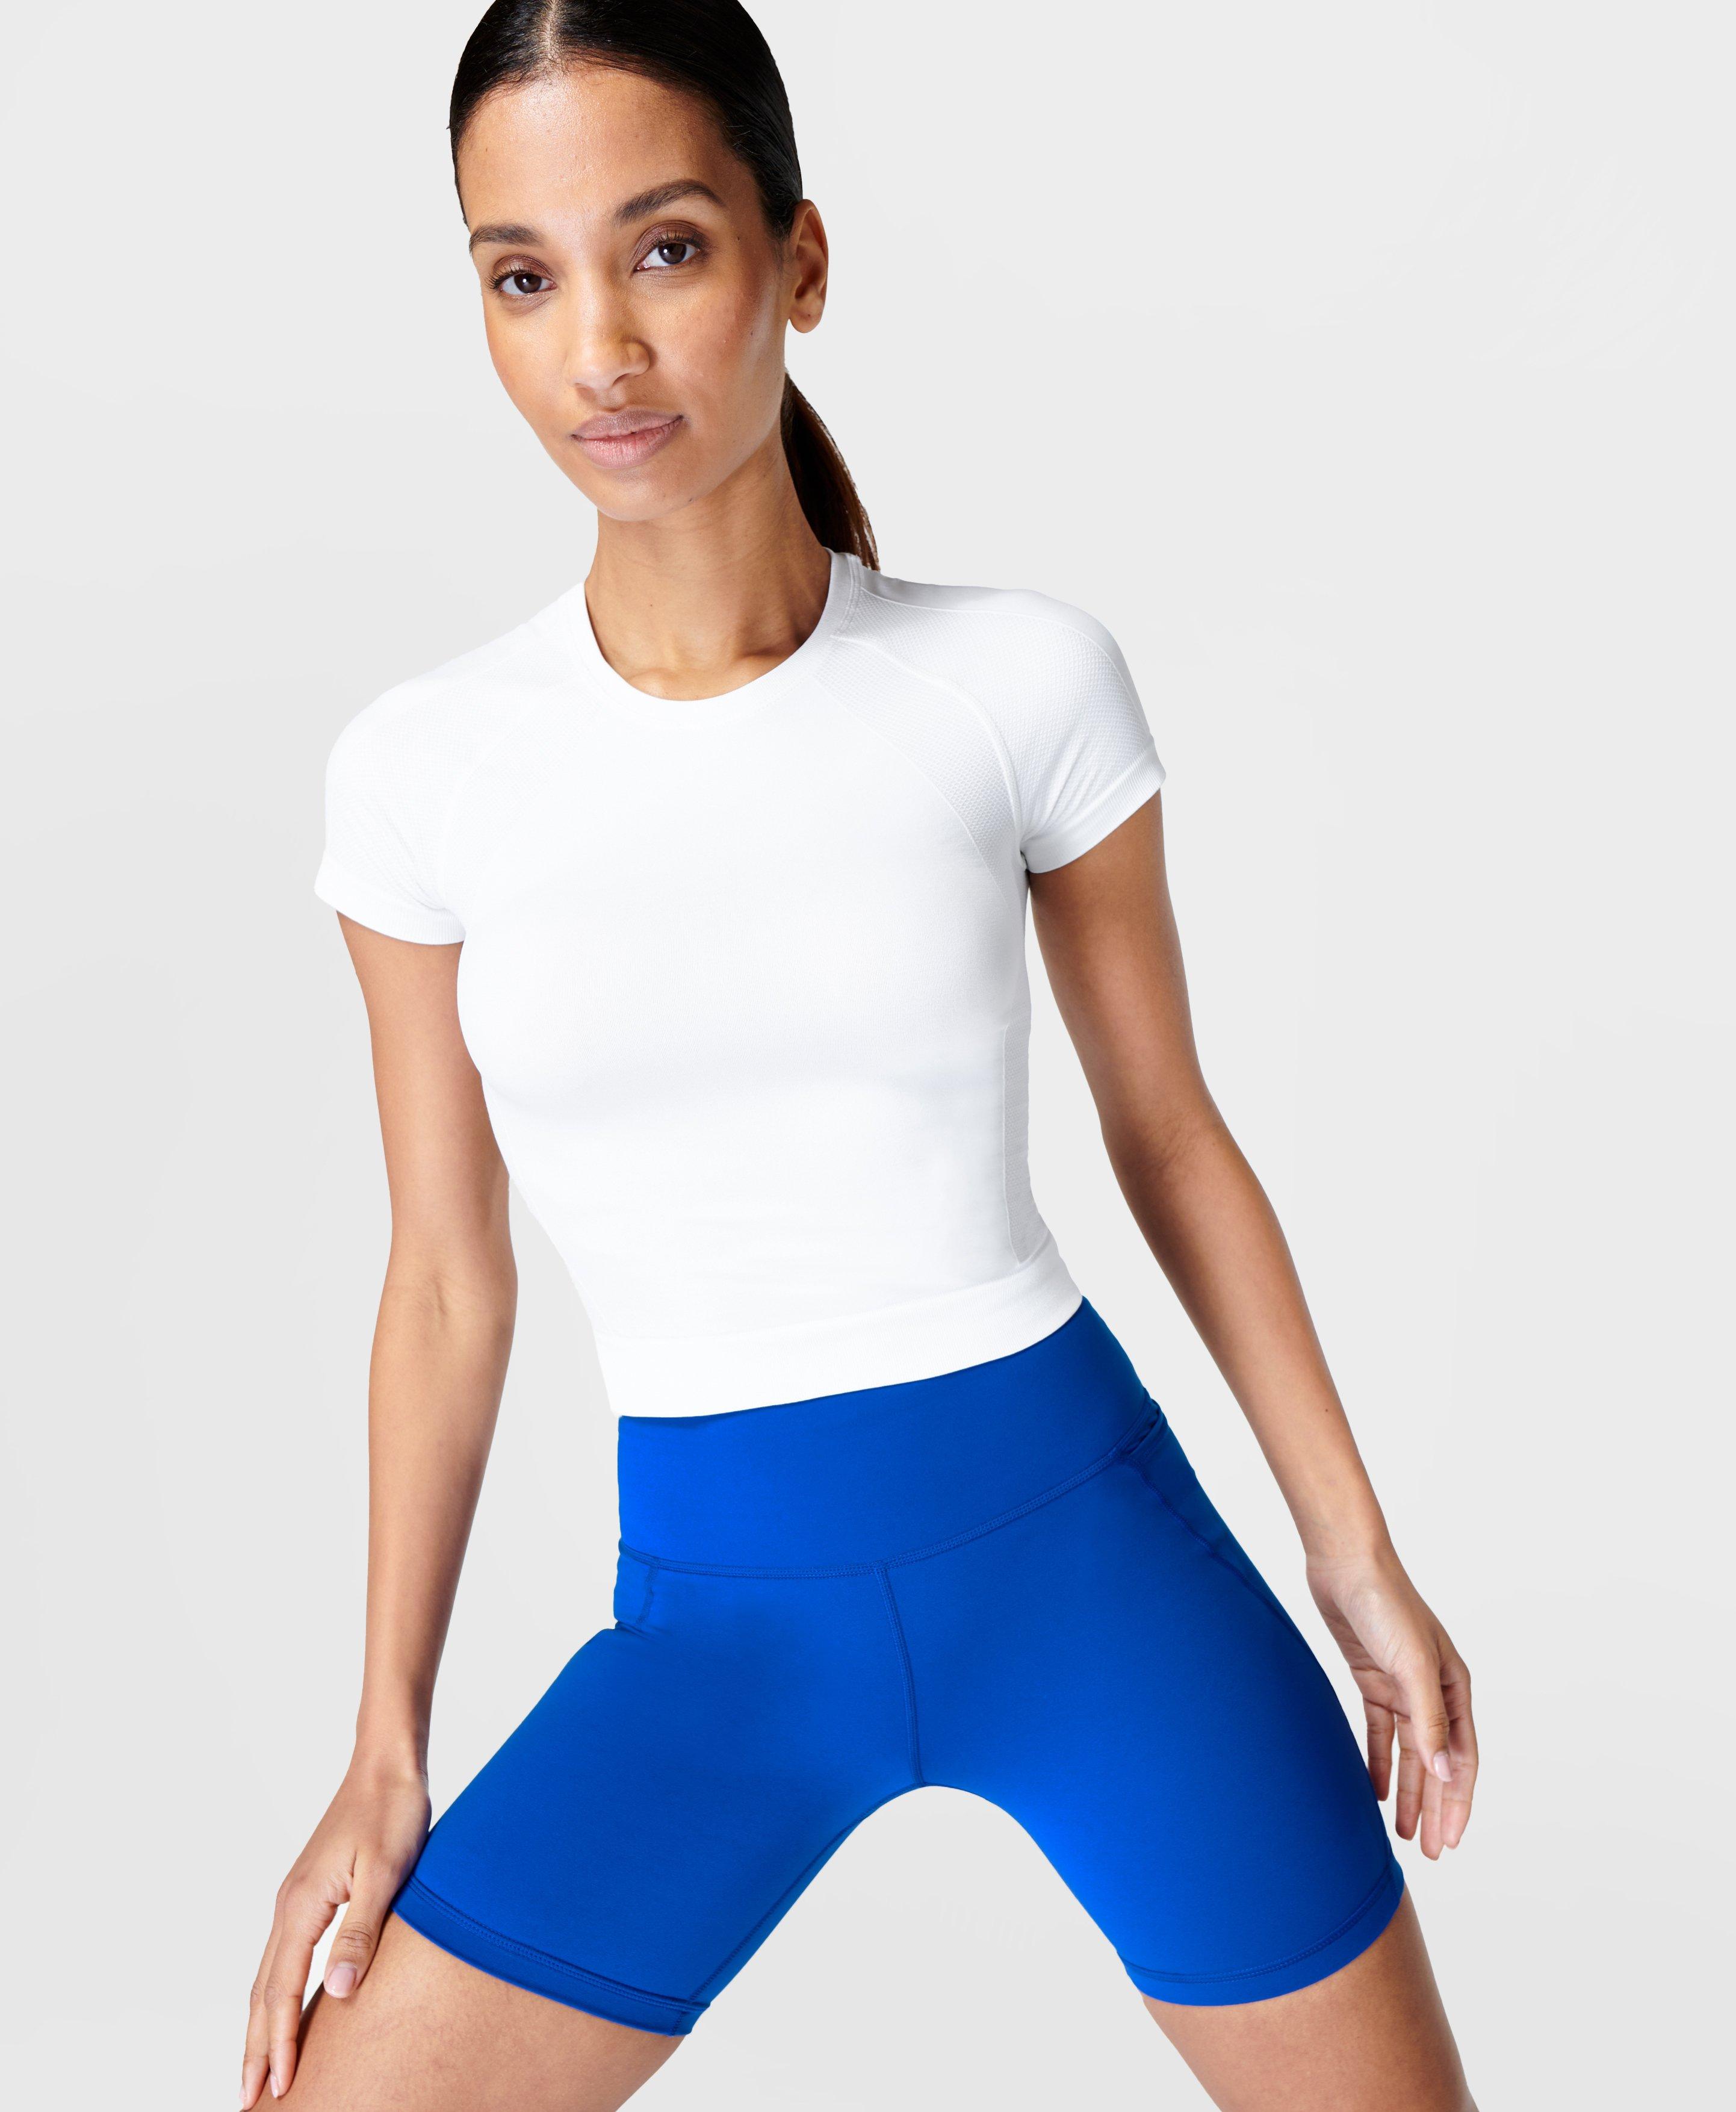 Crop Tops for Women in Sports the Strong Athletic Woman White Crop